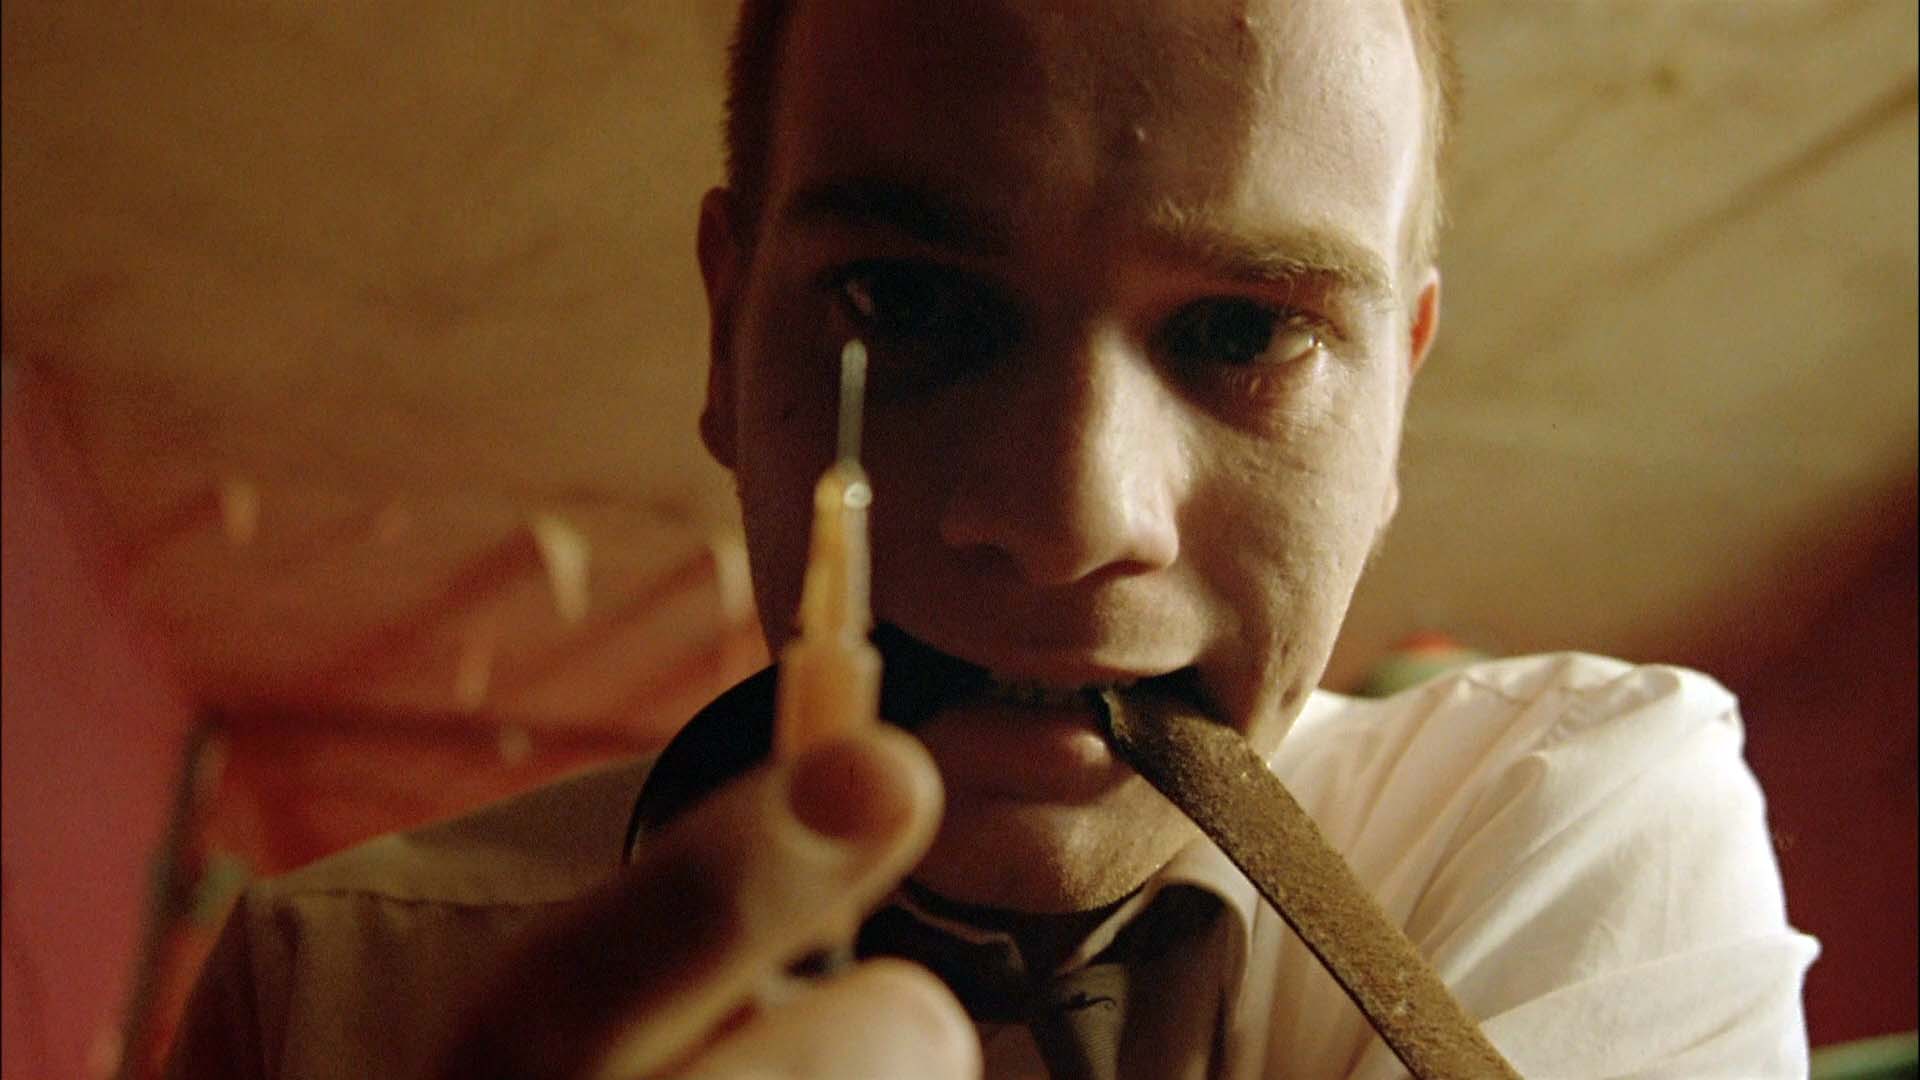 TRAINSPOTTING – BETWEEN SCREENS AND VANTAGE POINTS